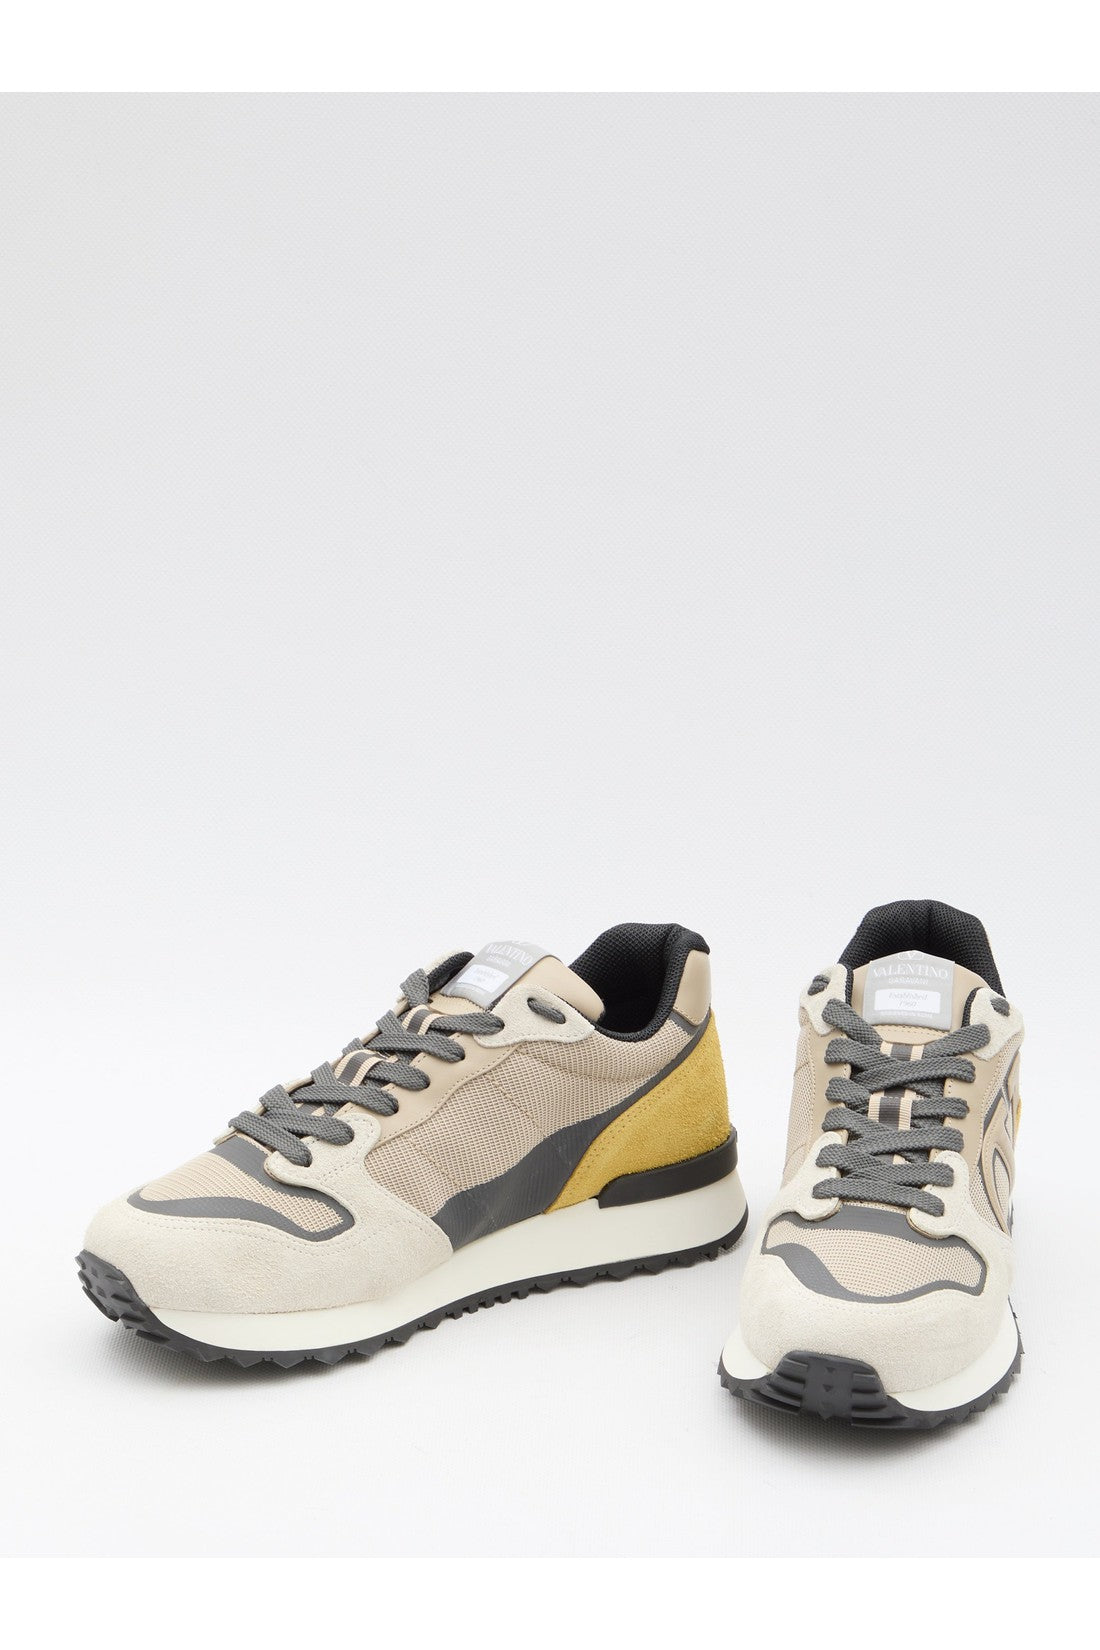 VLogo Pace sneakers